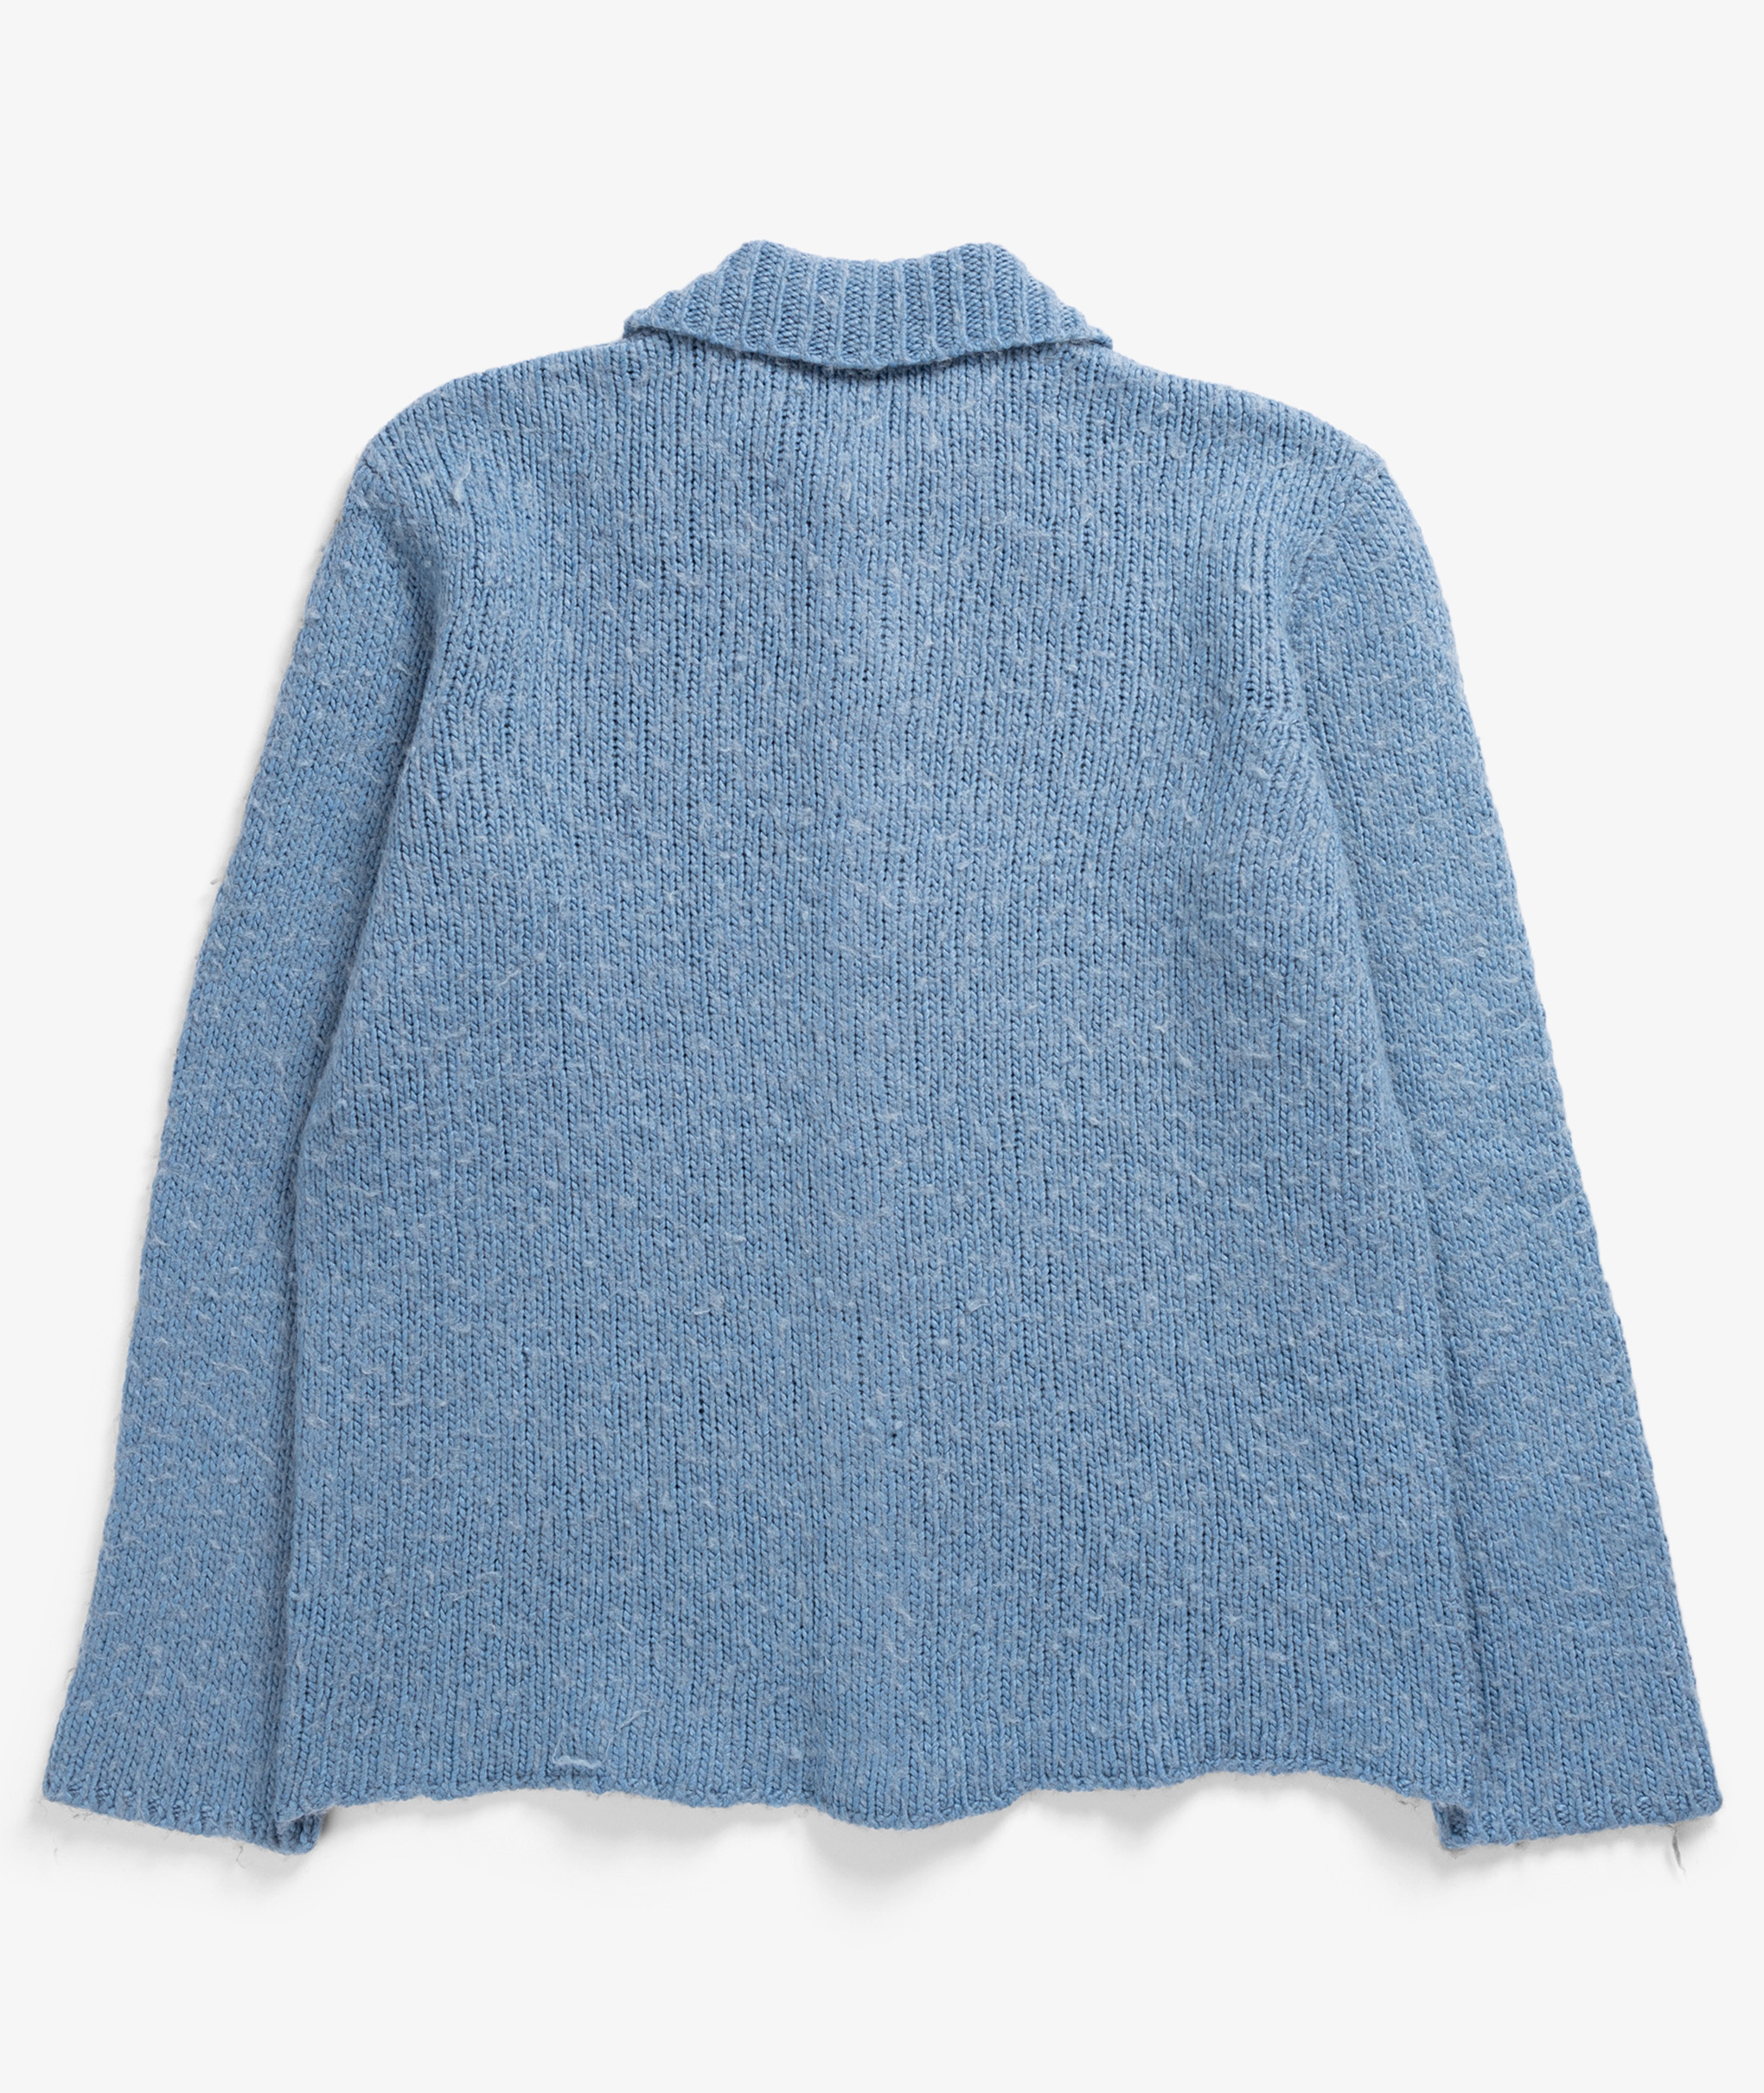 Norse Store | Shipping Worldwide - Our Legacy Big Cardigan - Funky Blue